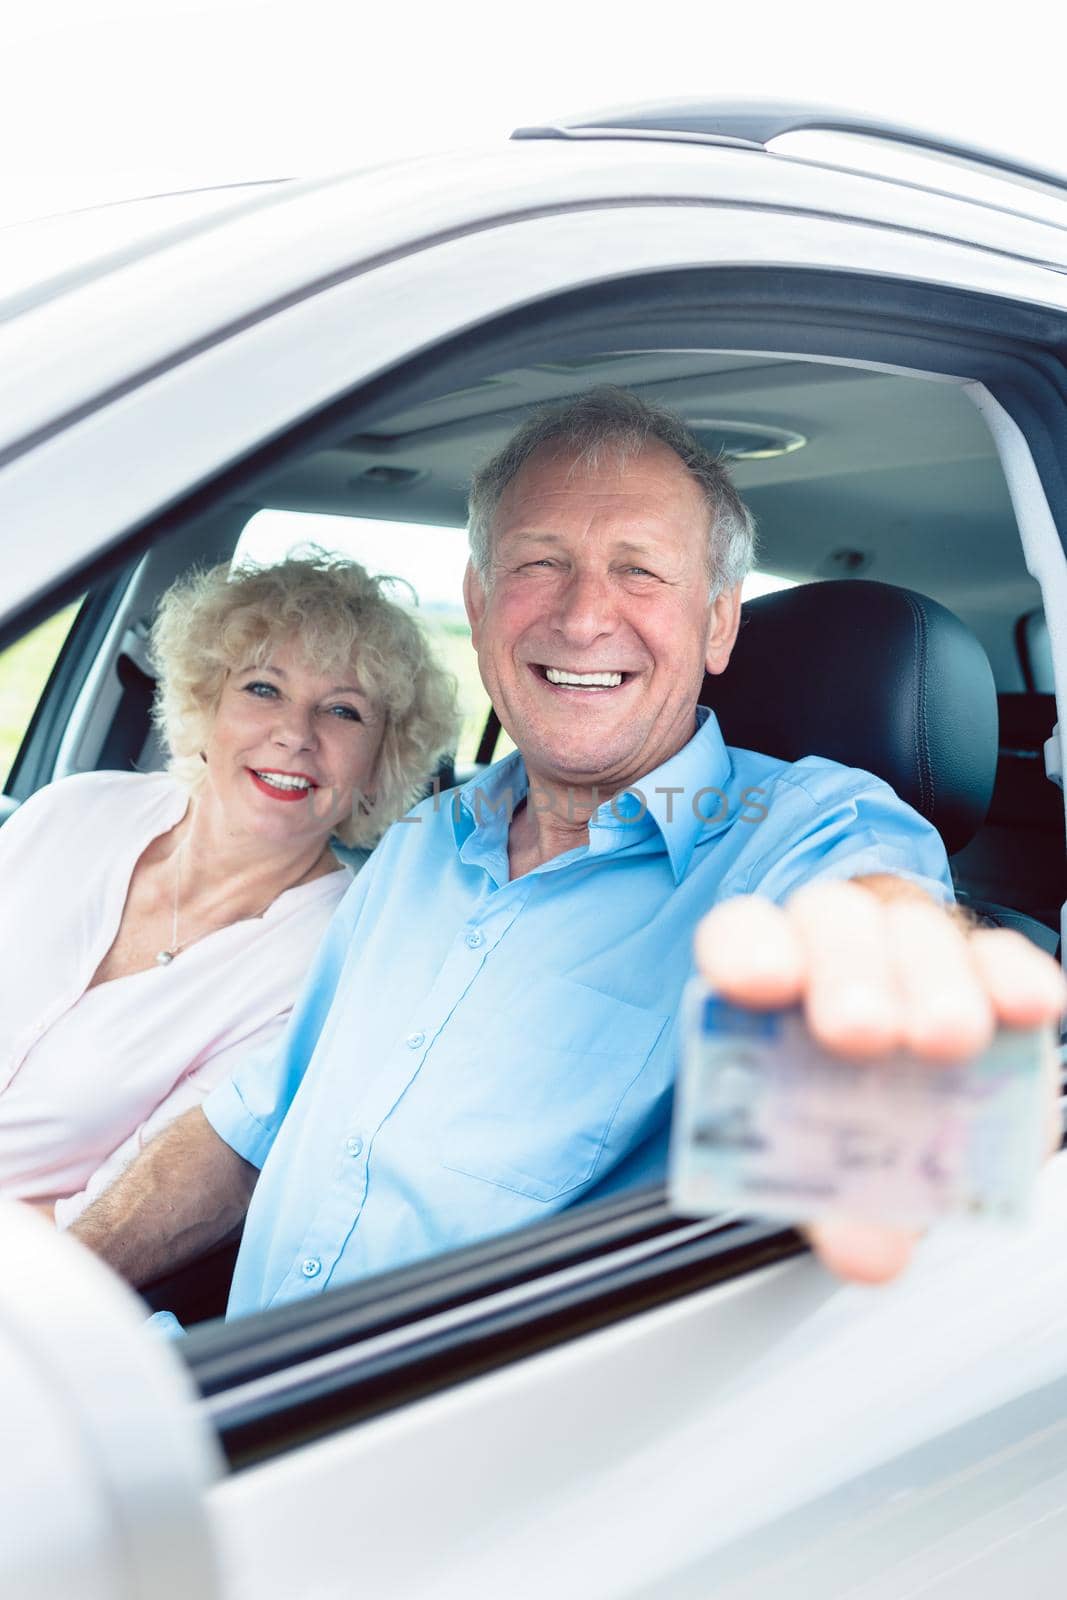 Portrait of a happy senior man showing his available driving license while sitting in the car next to his cheerful wife